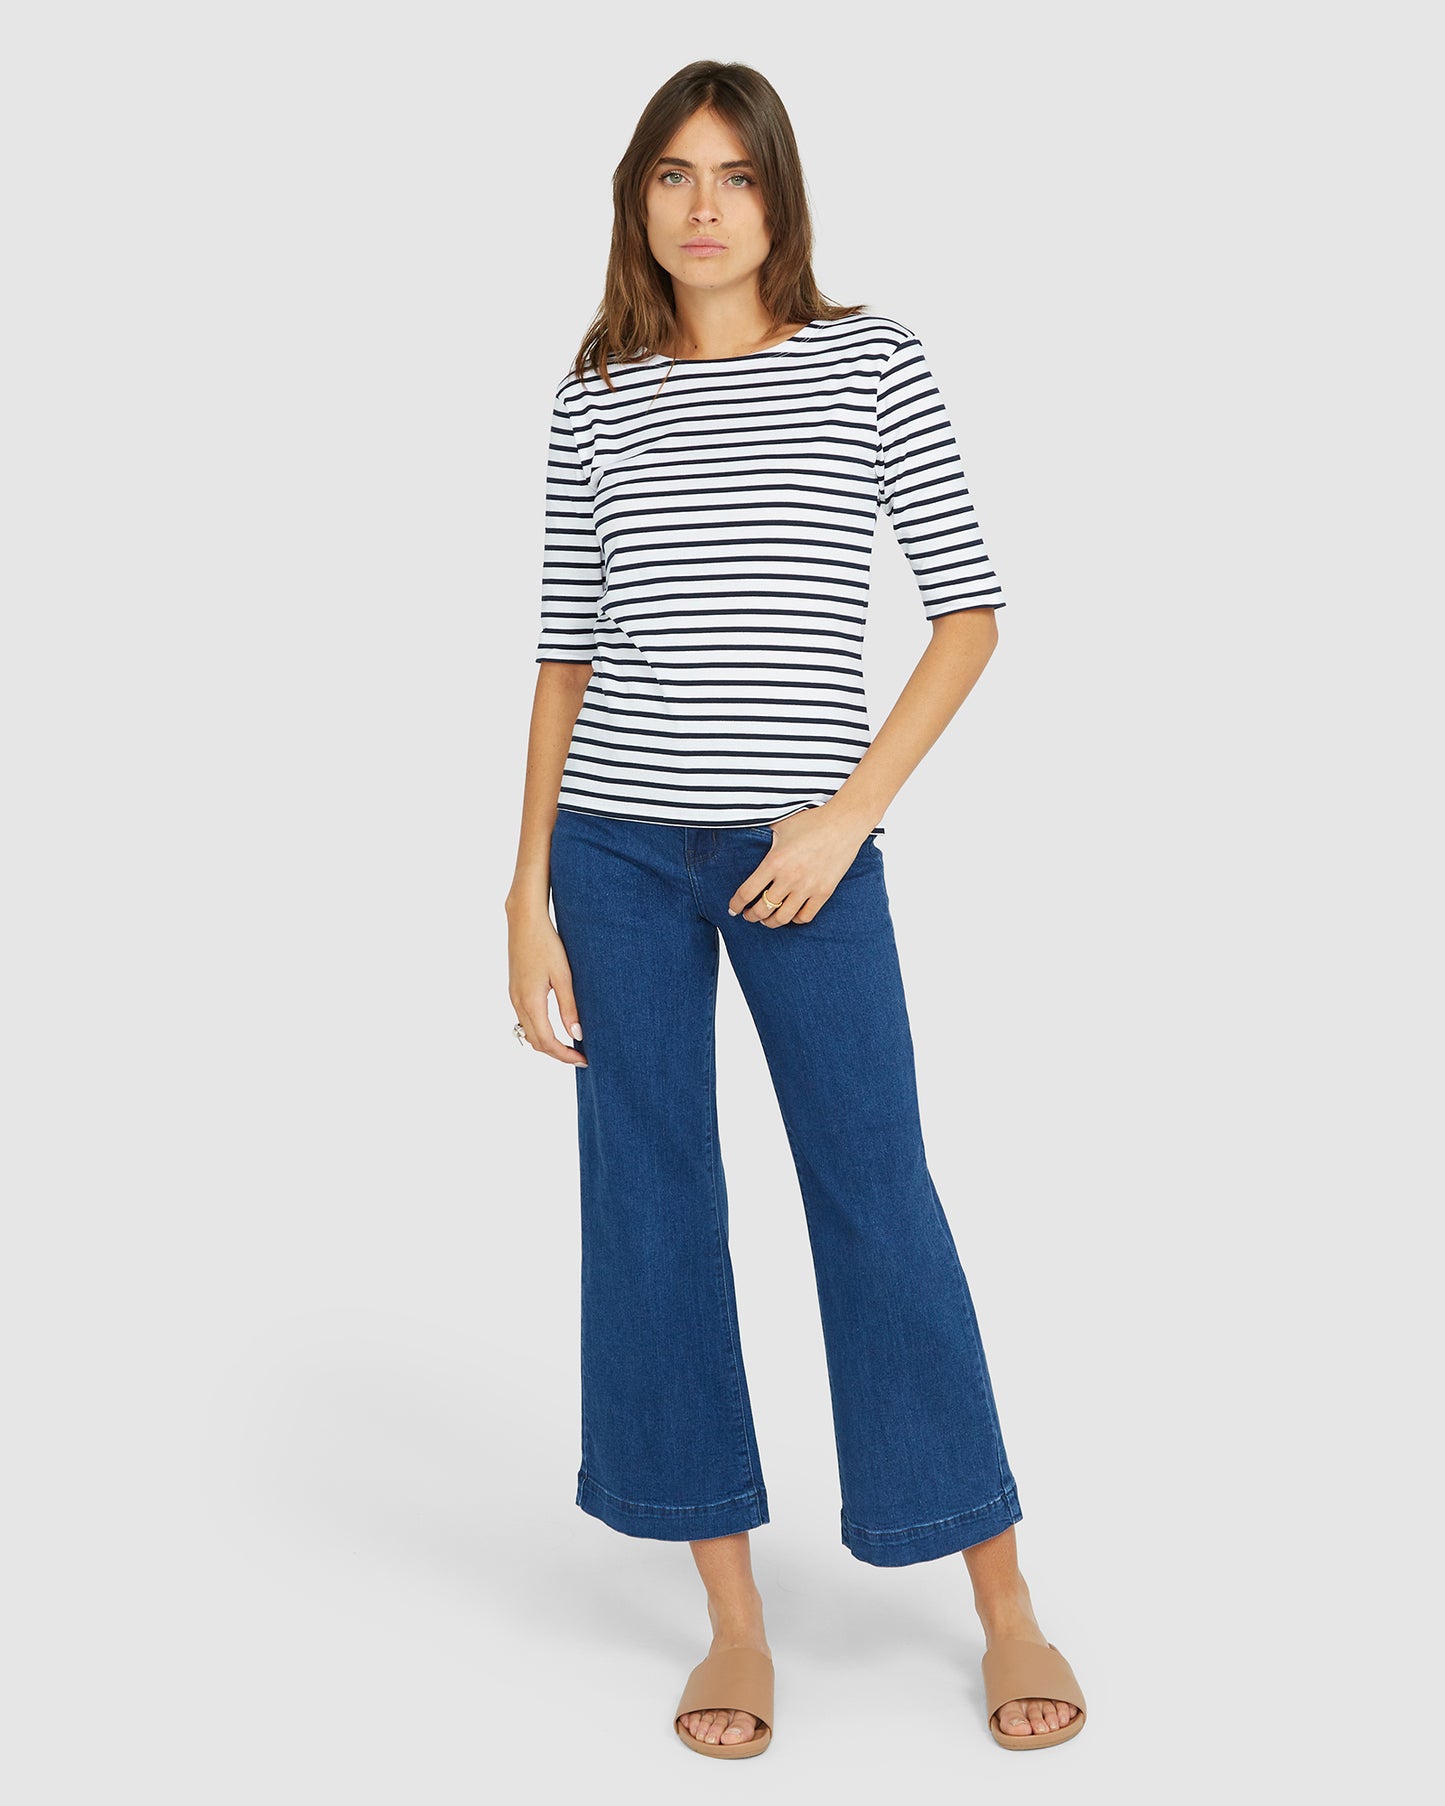 Load image into Gallery viewer, La Bouvier Navy Stripe French Tee - Boat Neck
